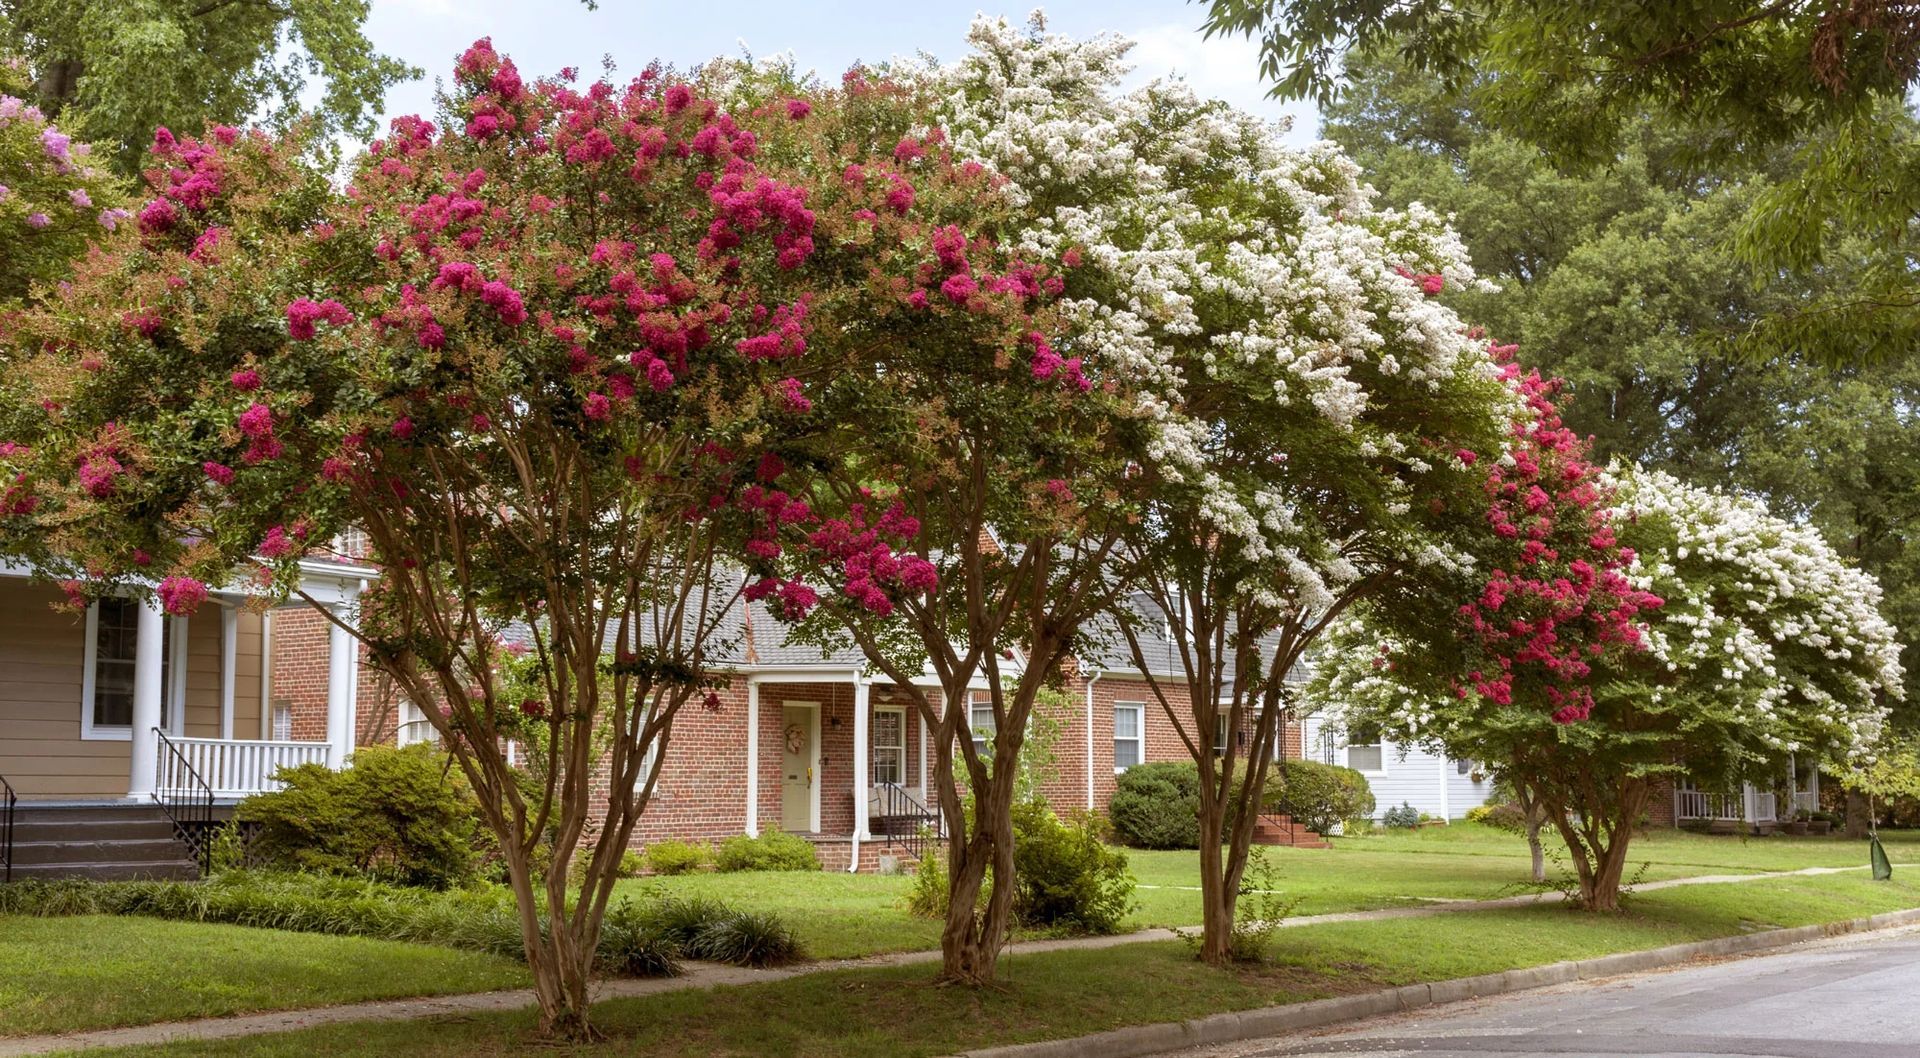 This picture shows 3 beautiful crape myrtles in full bloom that have been selectively topped.